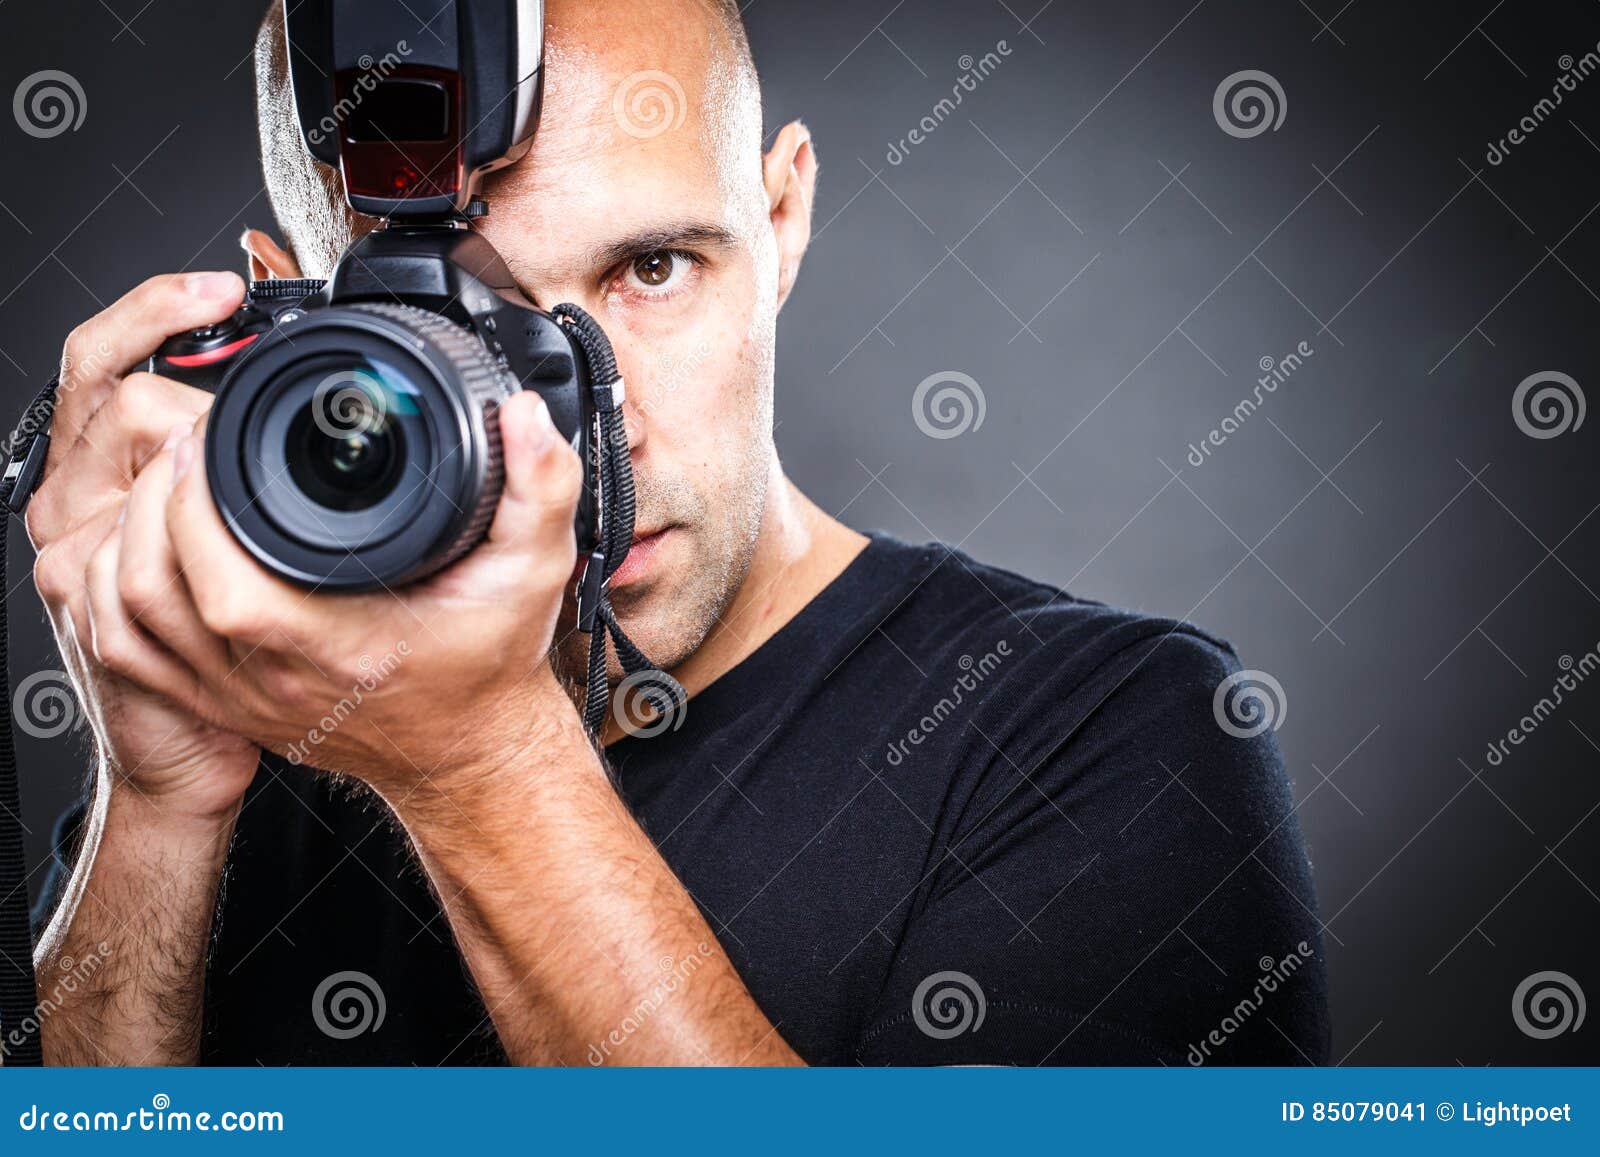 young, pro male photographer in his studio during a photo shoot